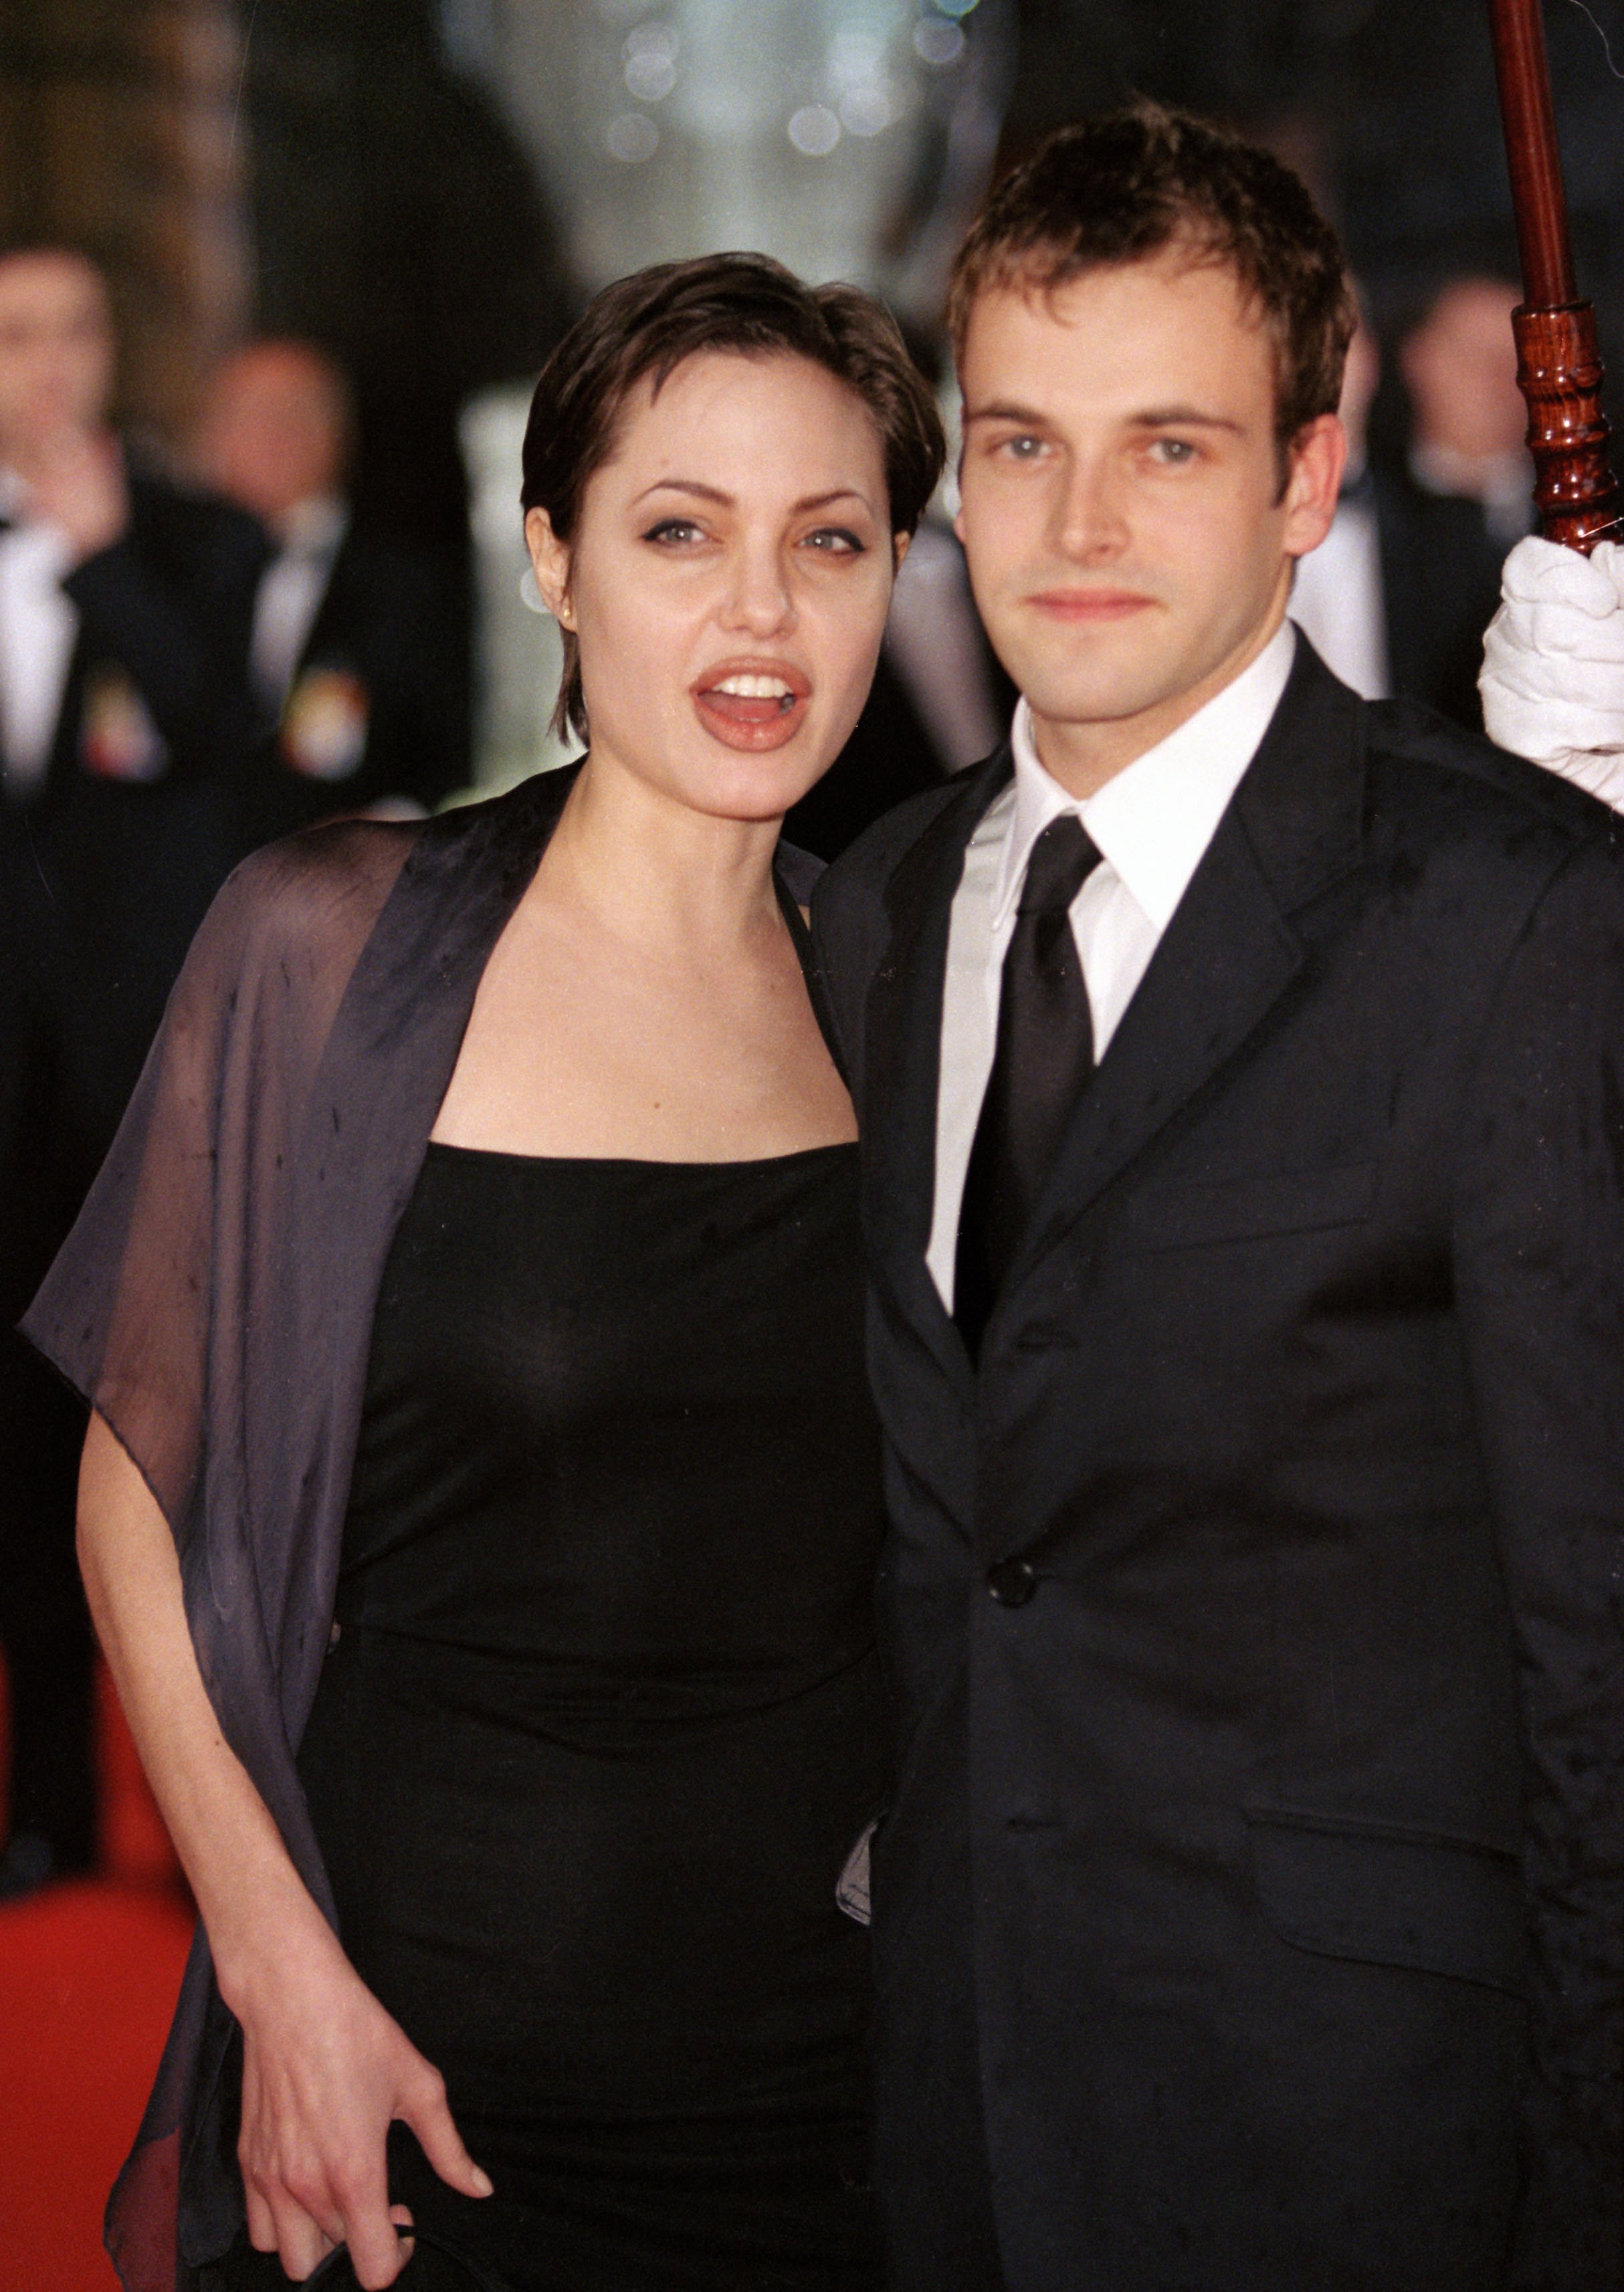 Angelina Jolie & Jonny Lee Miller Attend The Bafta British Academy Film Awards At London's Grosvenor House Hotel. in 1998 | Source: Getty Images